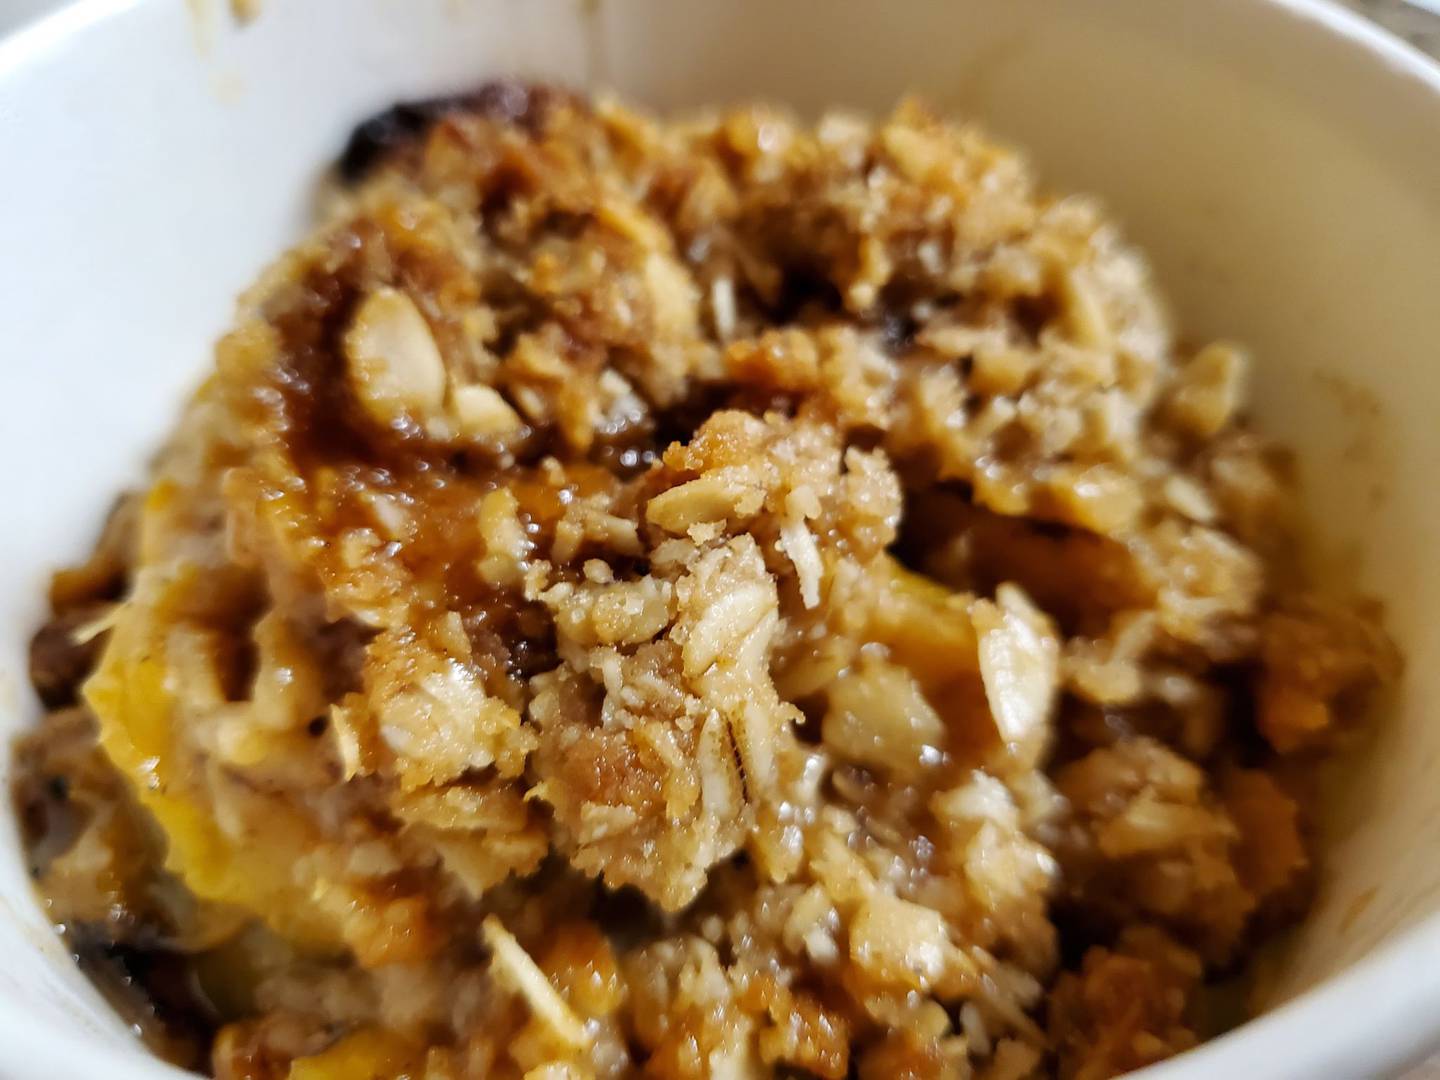 This sweet peach crisp with grill marks on the peaches makes a sweet finish to any meal at Station One Smokehouse in Plainfield.